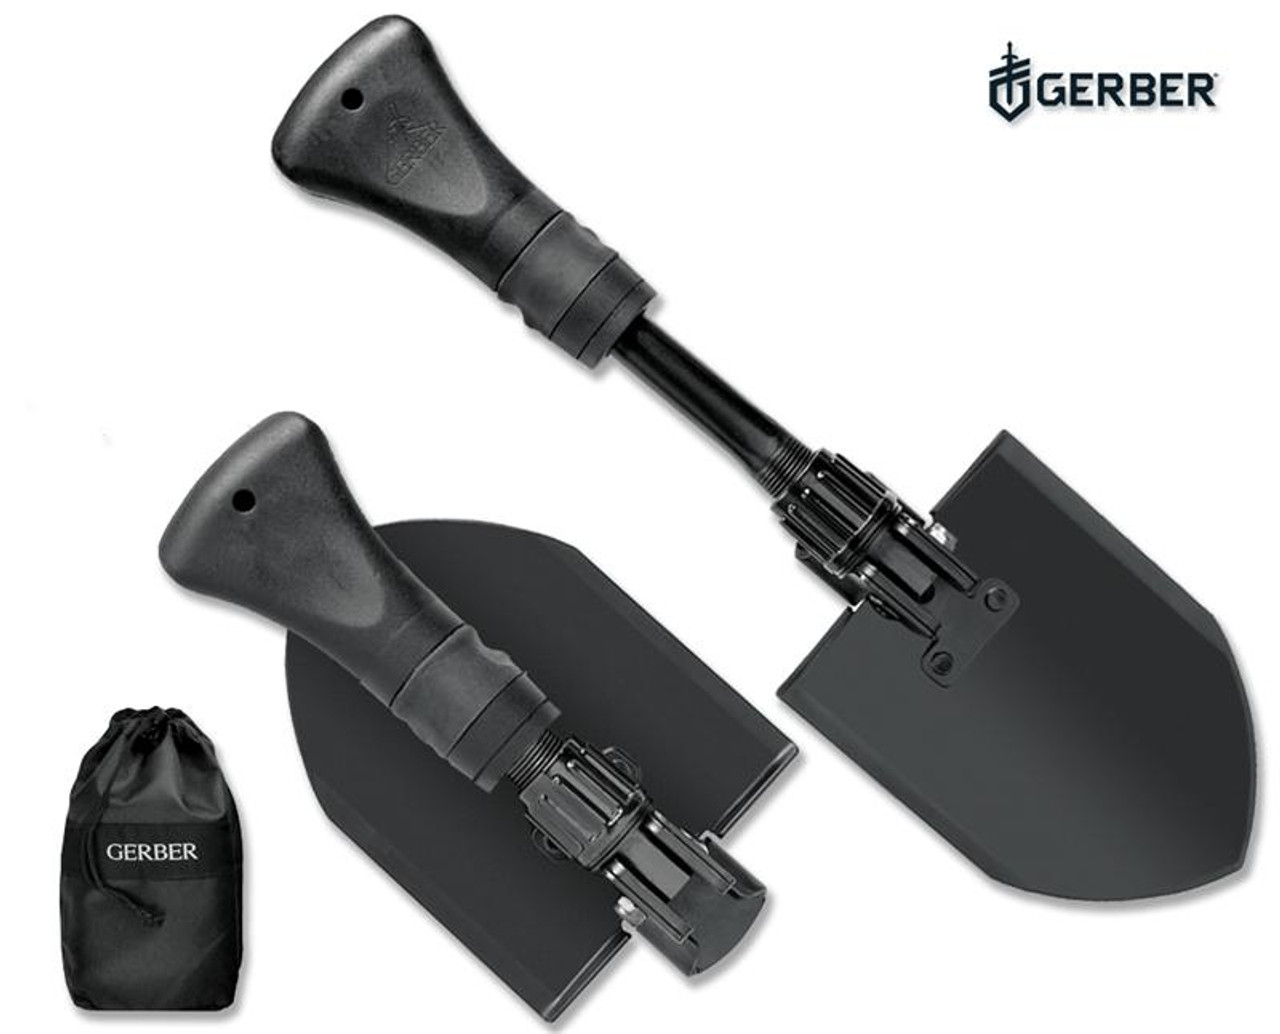 collapsible shovel